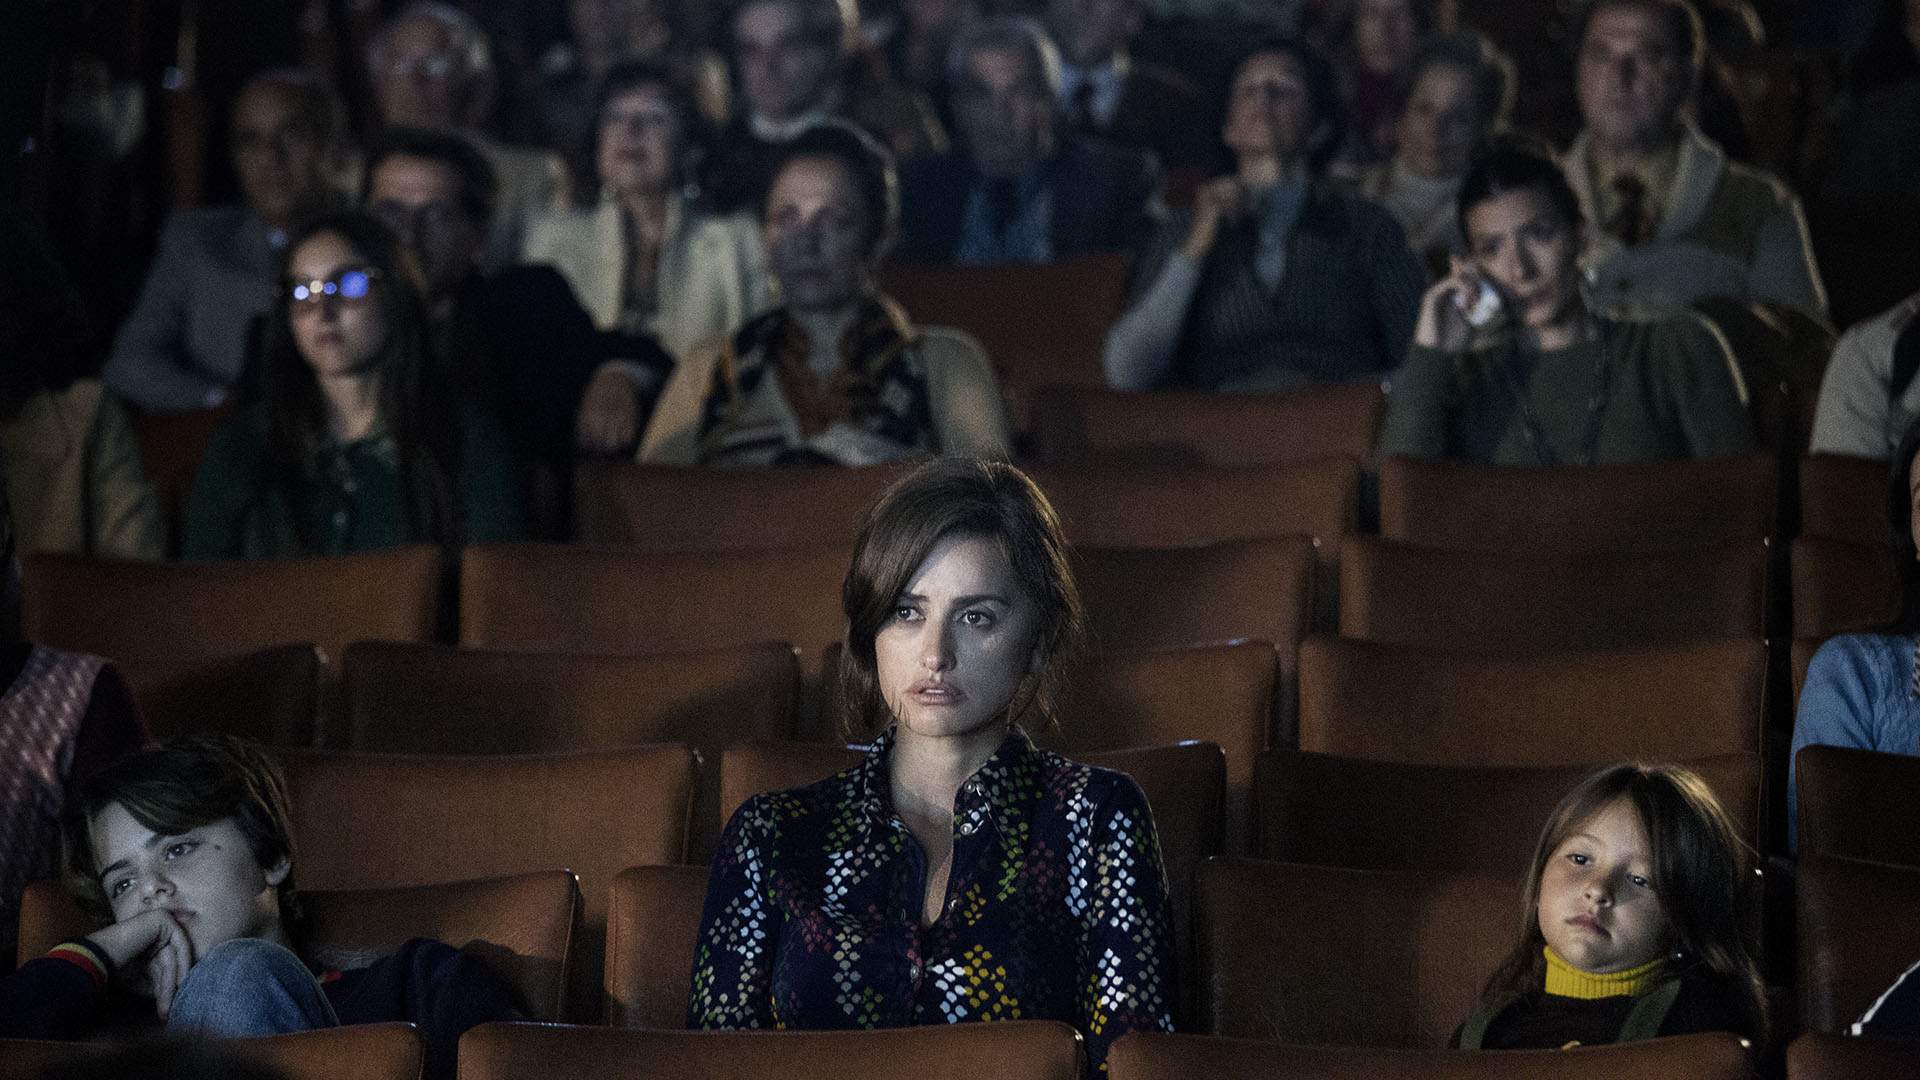 Penelope Cruz, Haruki Murakami, a Doco About Docos: They're All on Sydney Film Festival's First 2023 Lineup